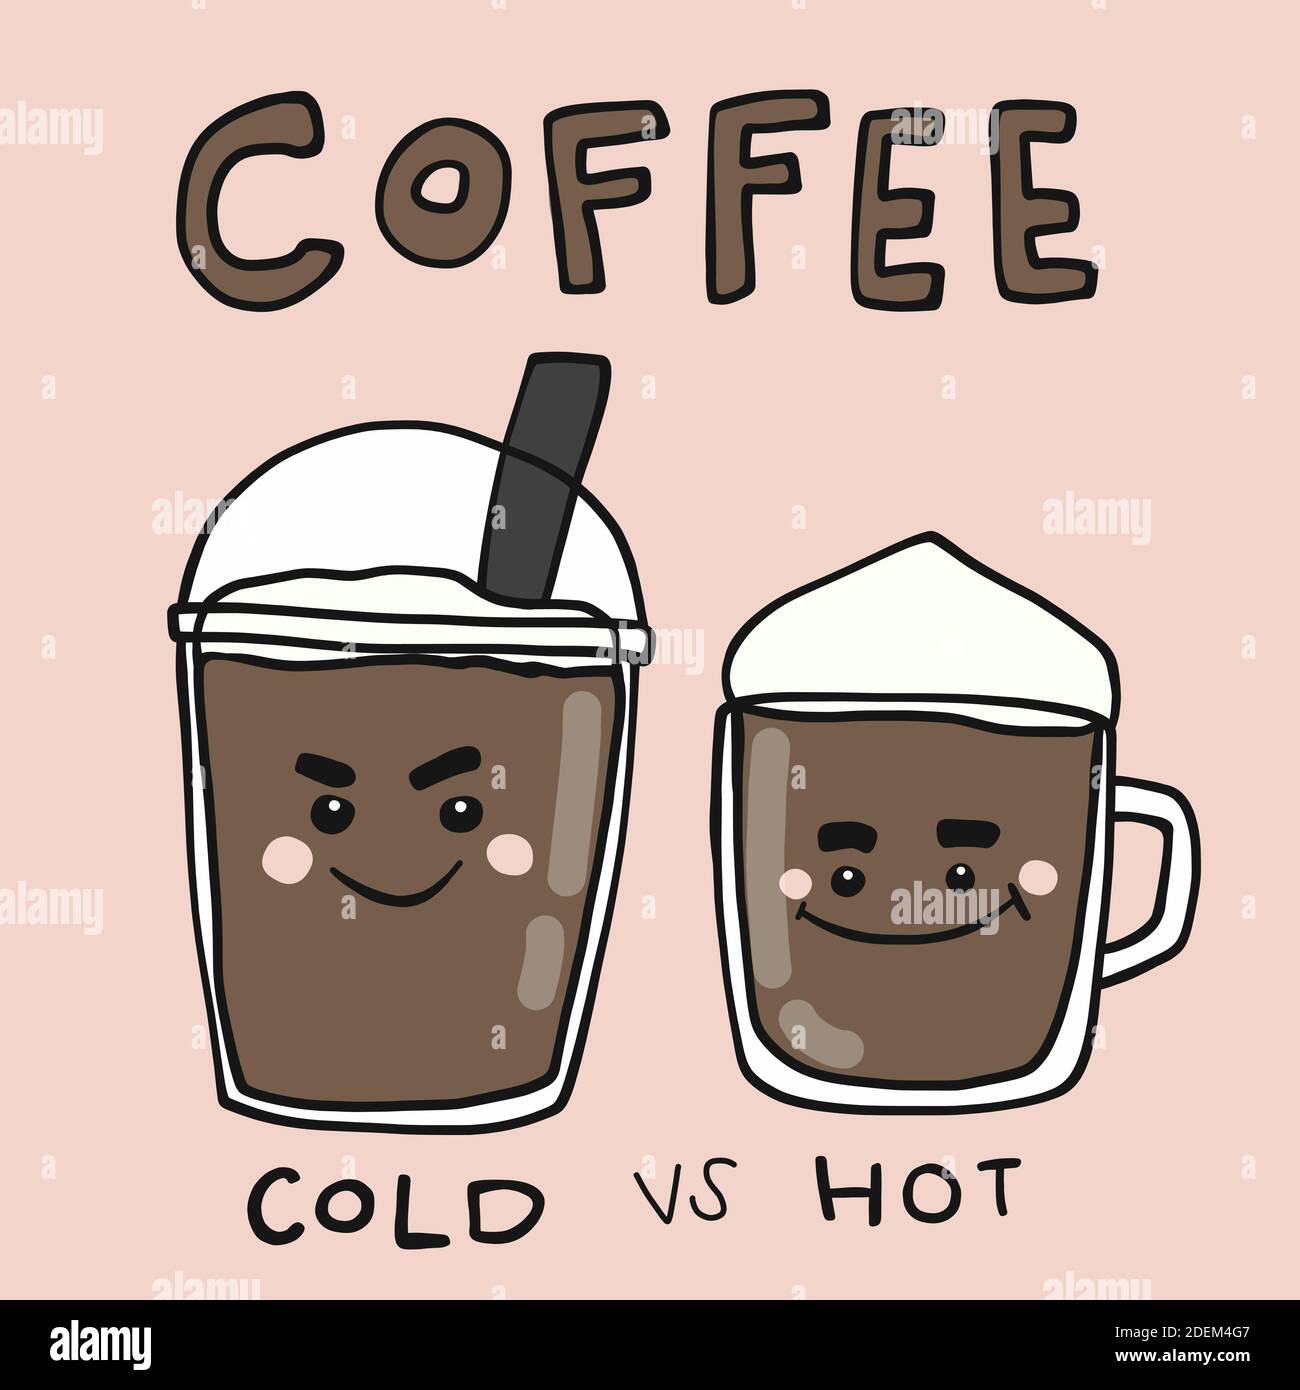 https://c8.alamy.com/comp/2DEM4G7/coffee-cup-hot-and-cold-cartoon-vector-illustration-doodle-style-2DEM4G7.jpg